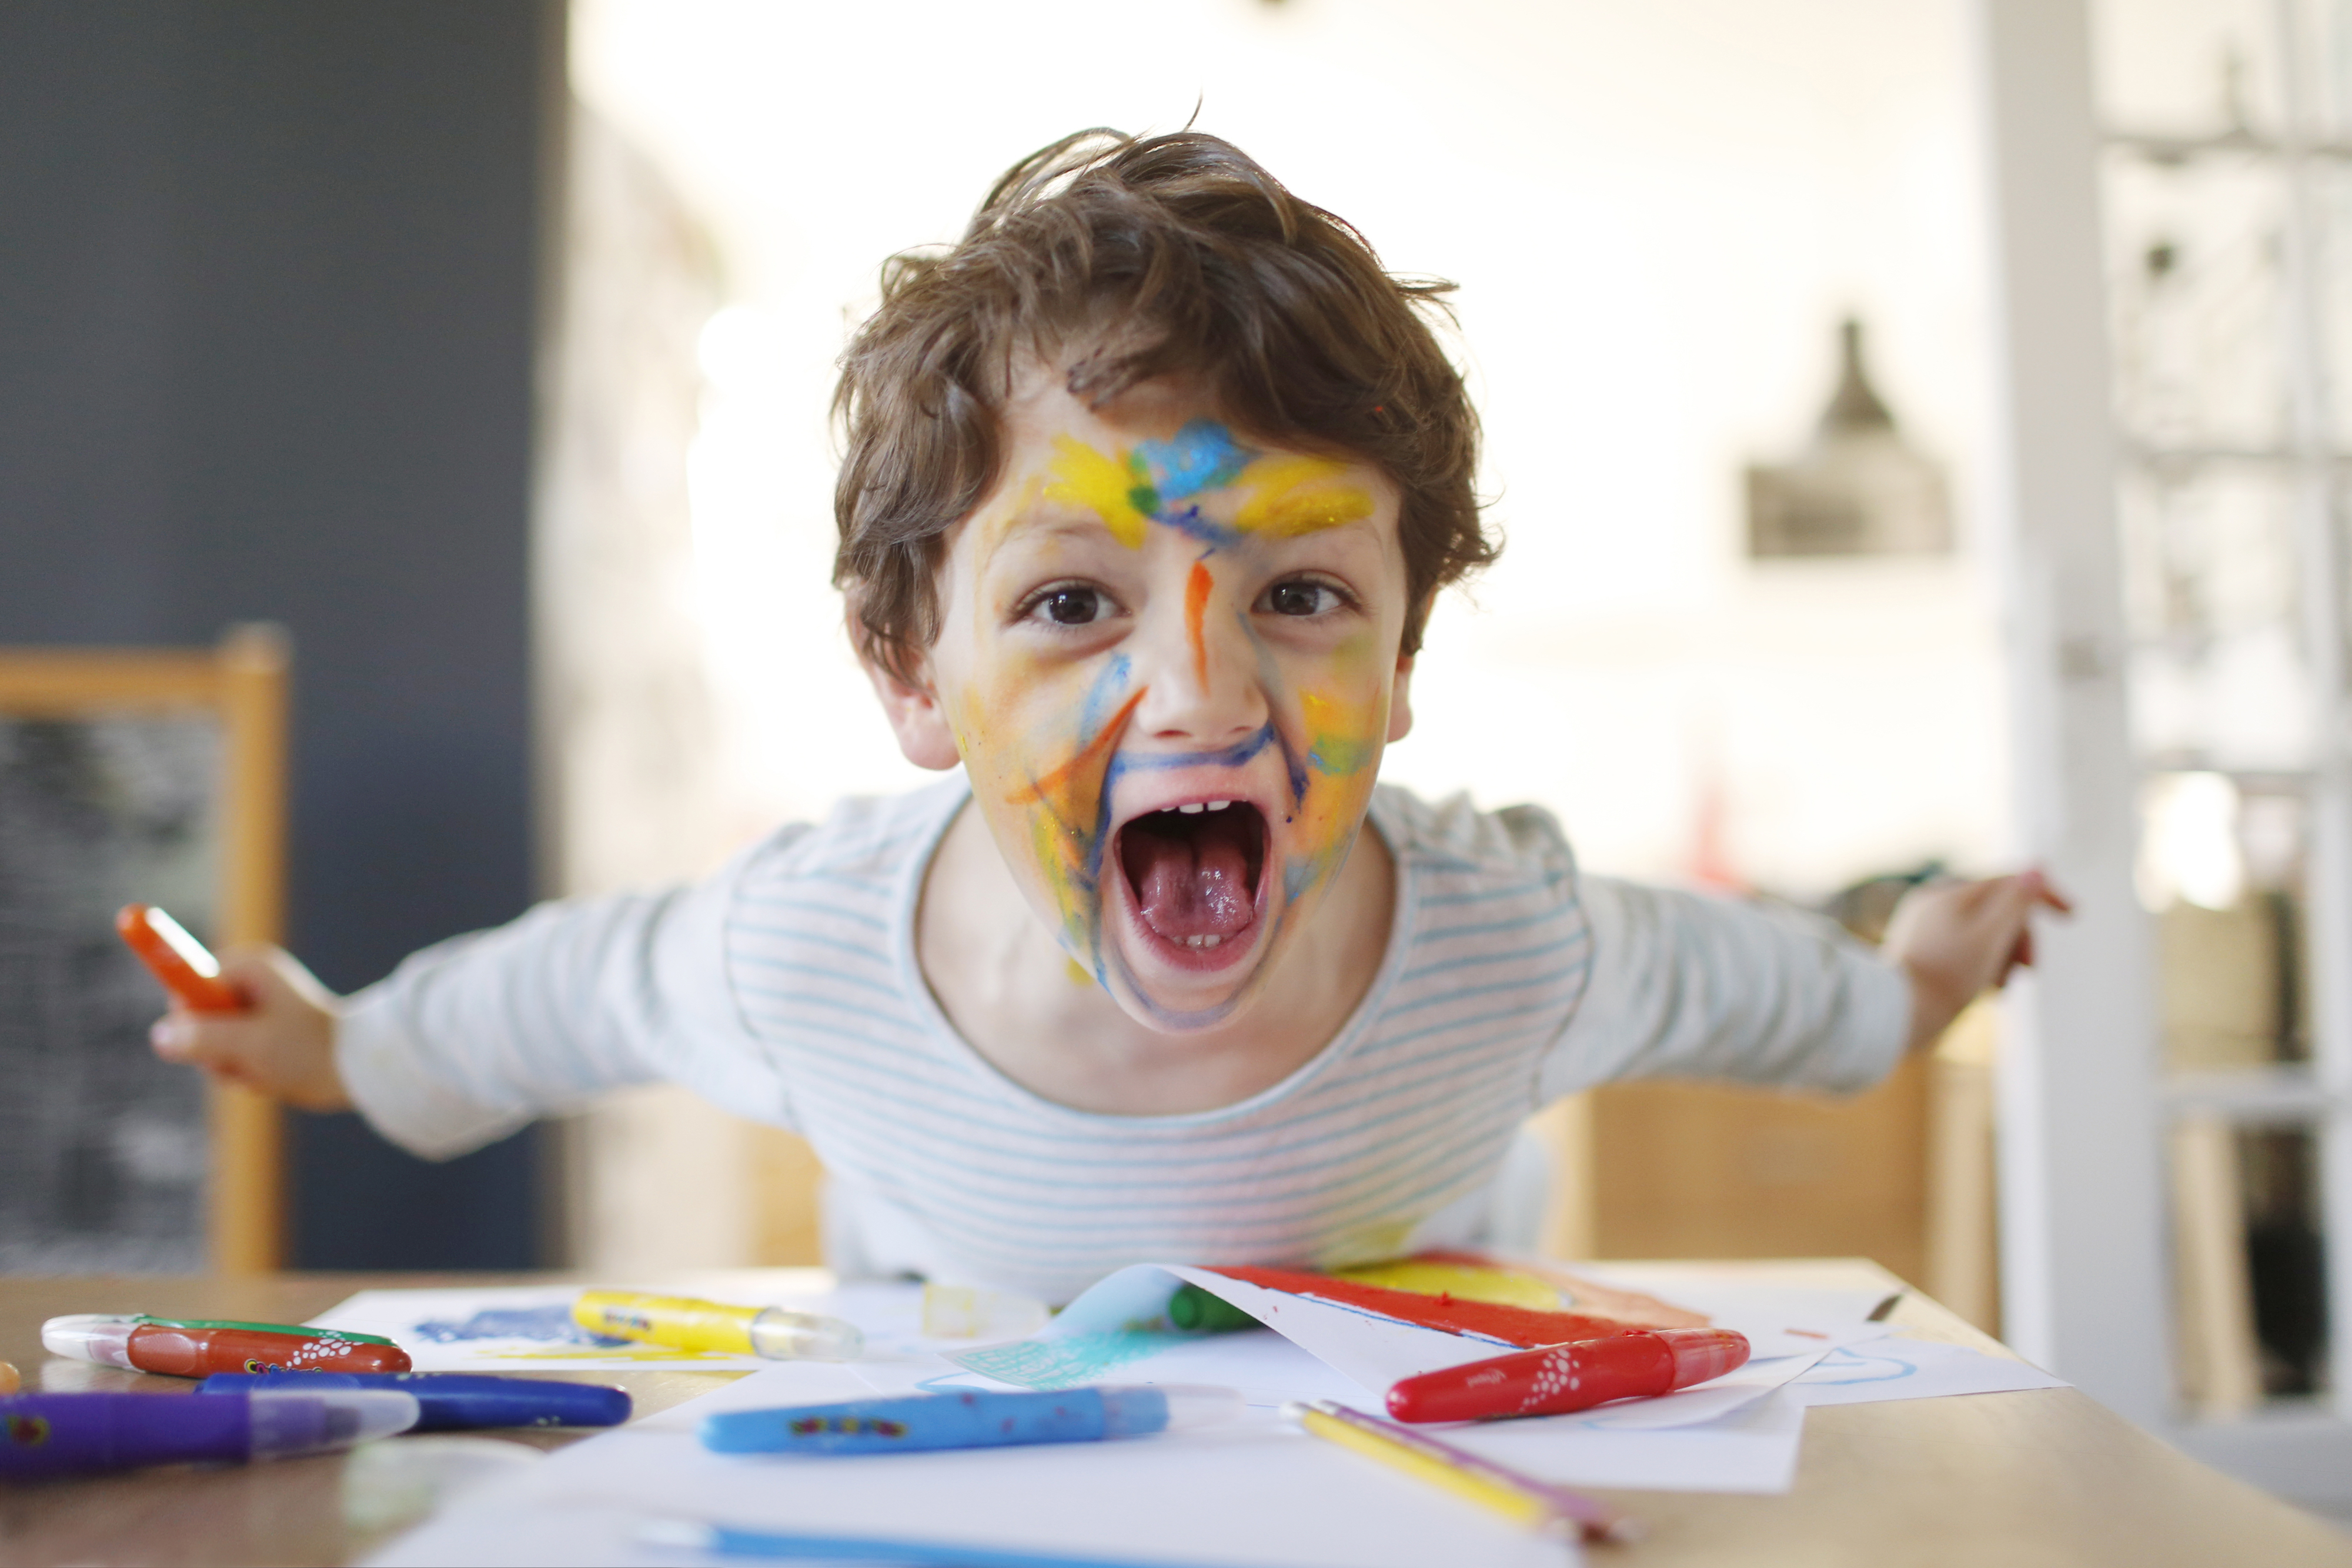 A rowdy 4-year-old with paint on their face